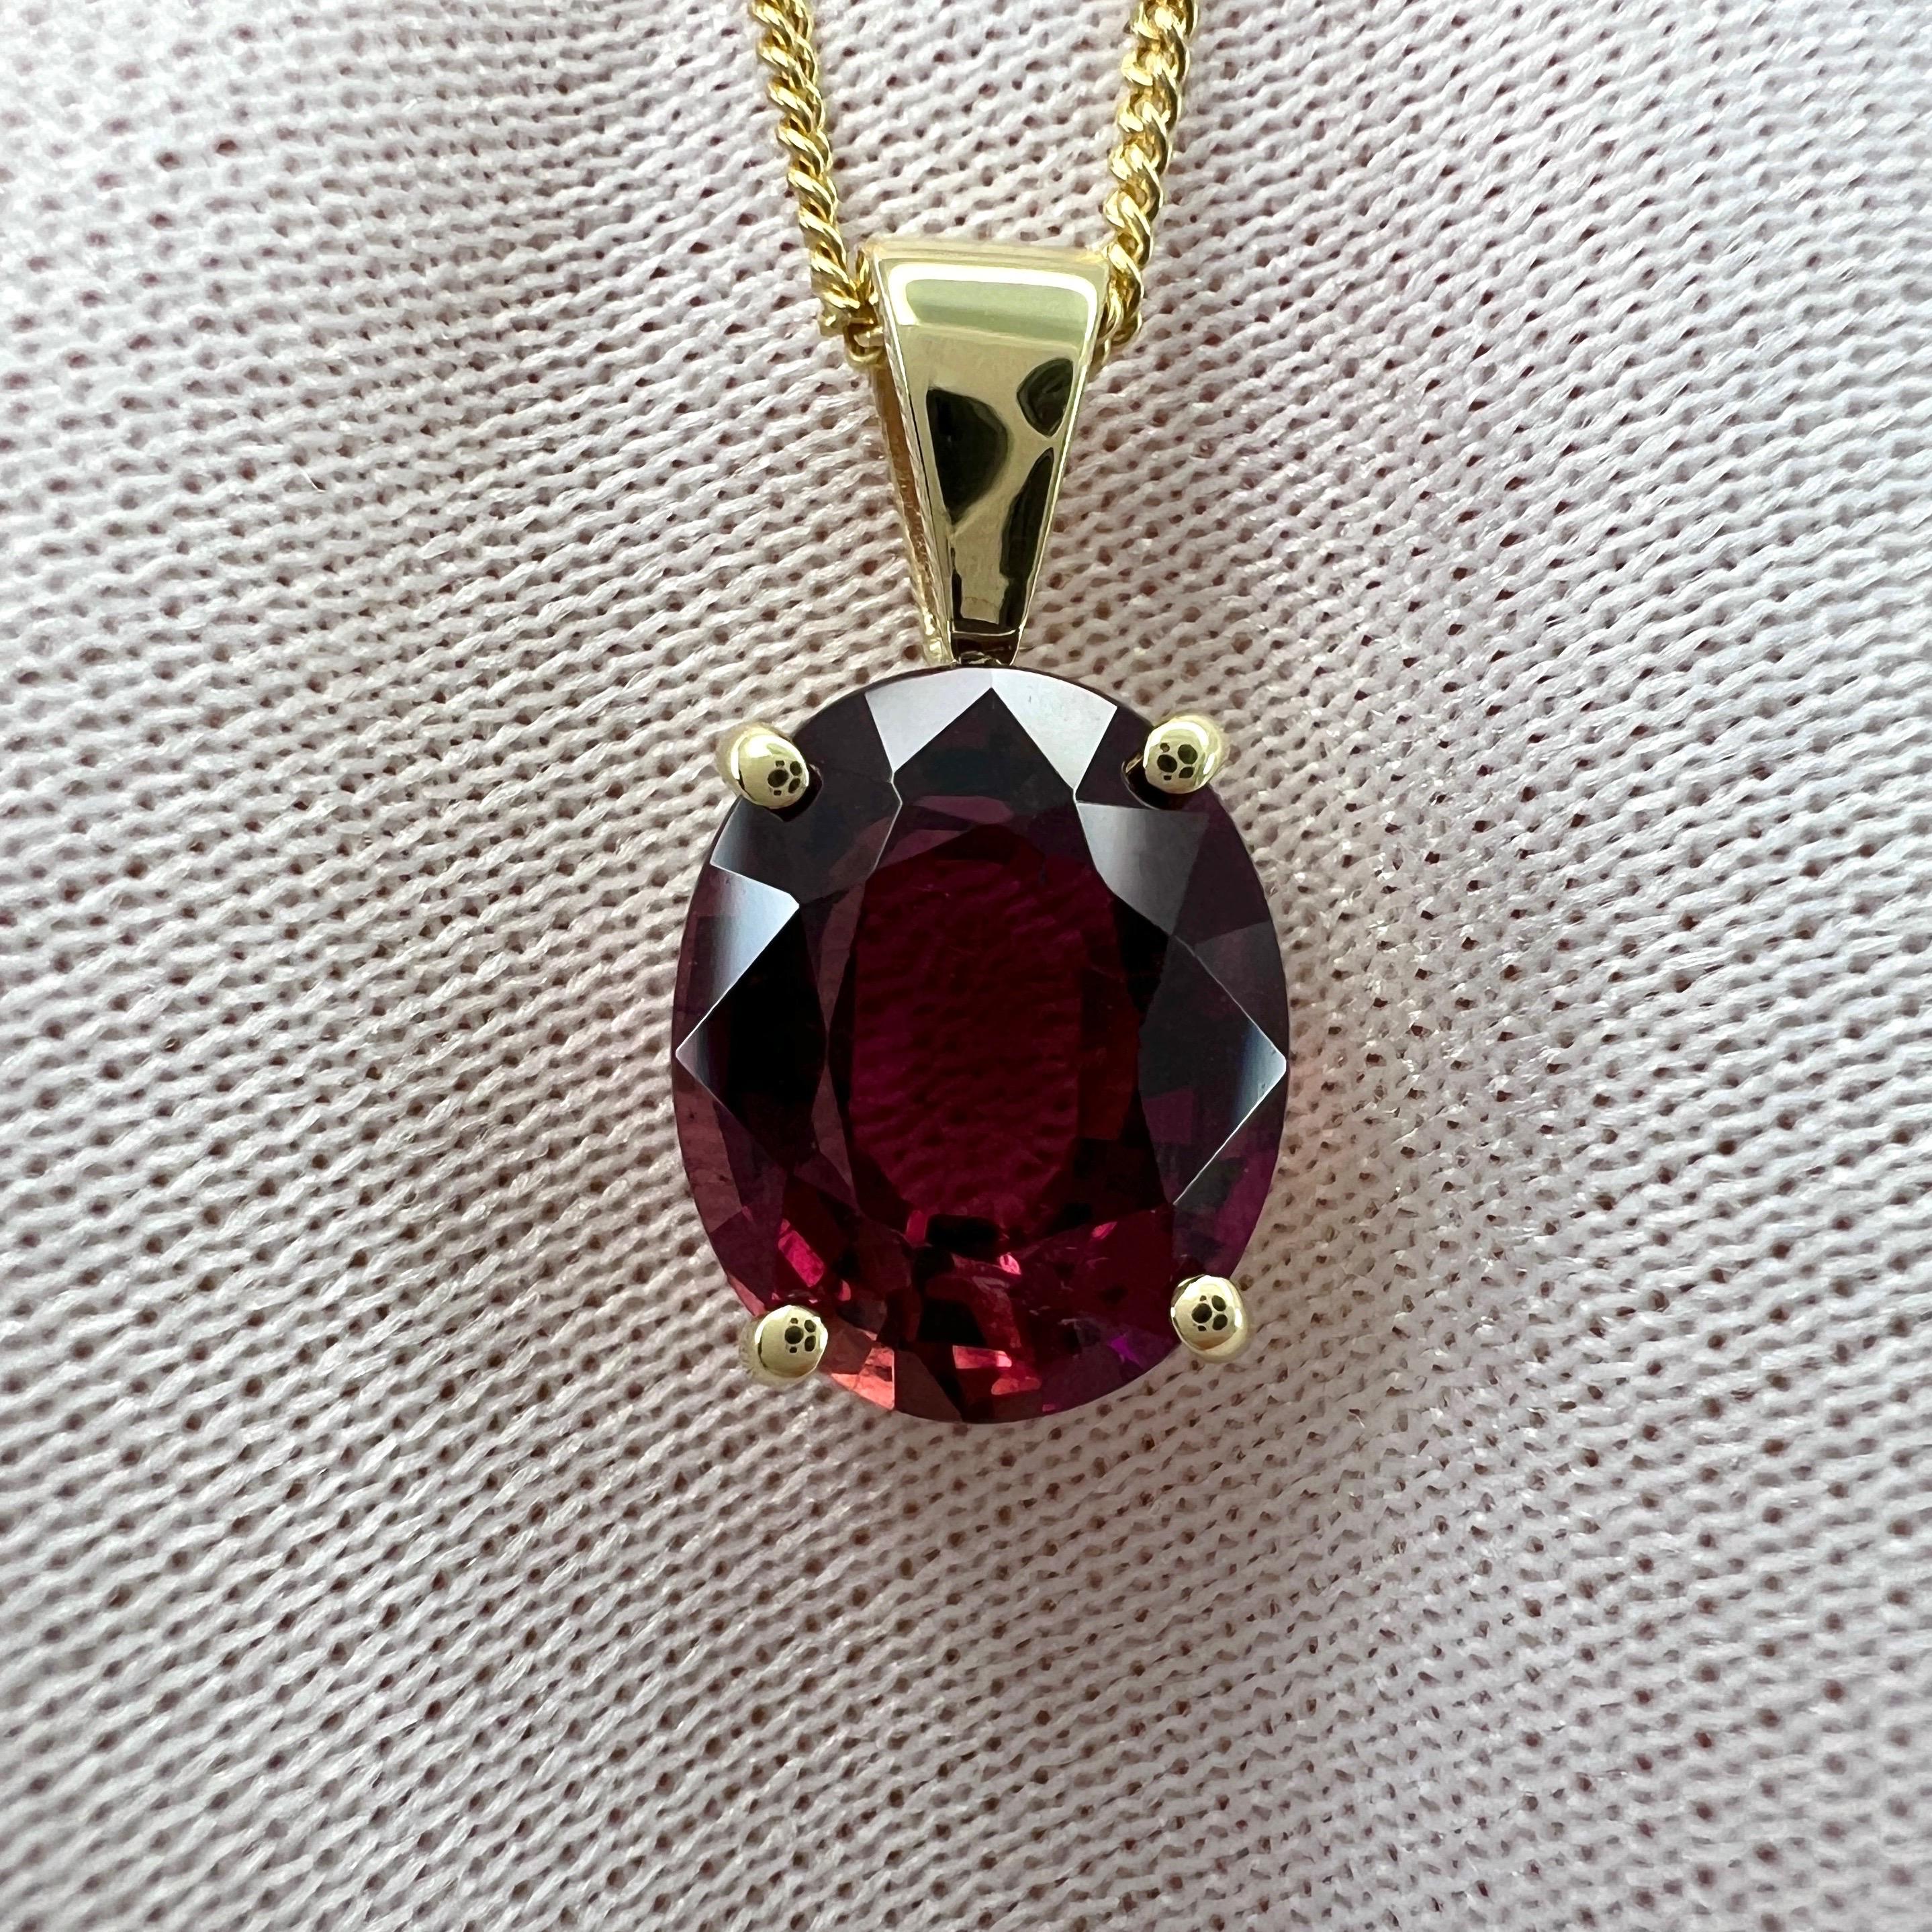 Pink Rubellite Tourmaline Oval Cut 9k Yellow Gold Pendant Necklace.

2.66 Carat rubellite tourmaline with a pink colour, an excellent oval cut and good clarity. Some small natural inclusions visible when looking closely but still a clean stone.

Set